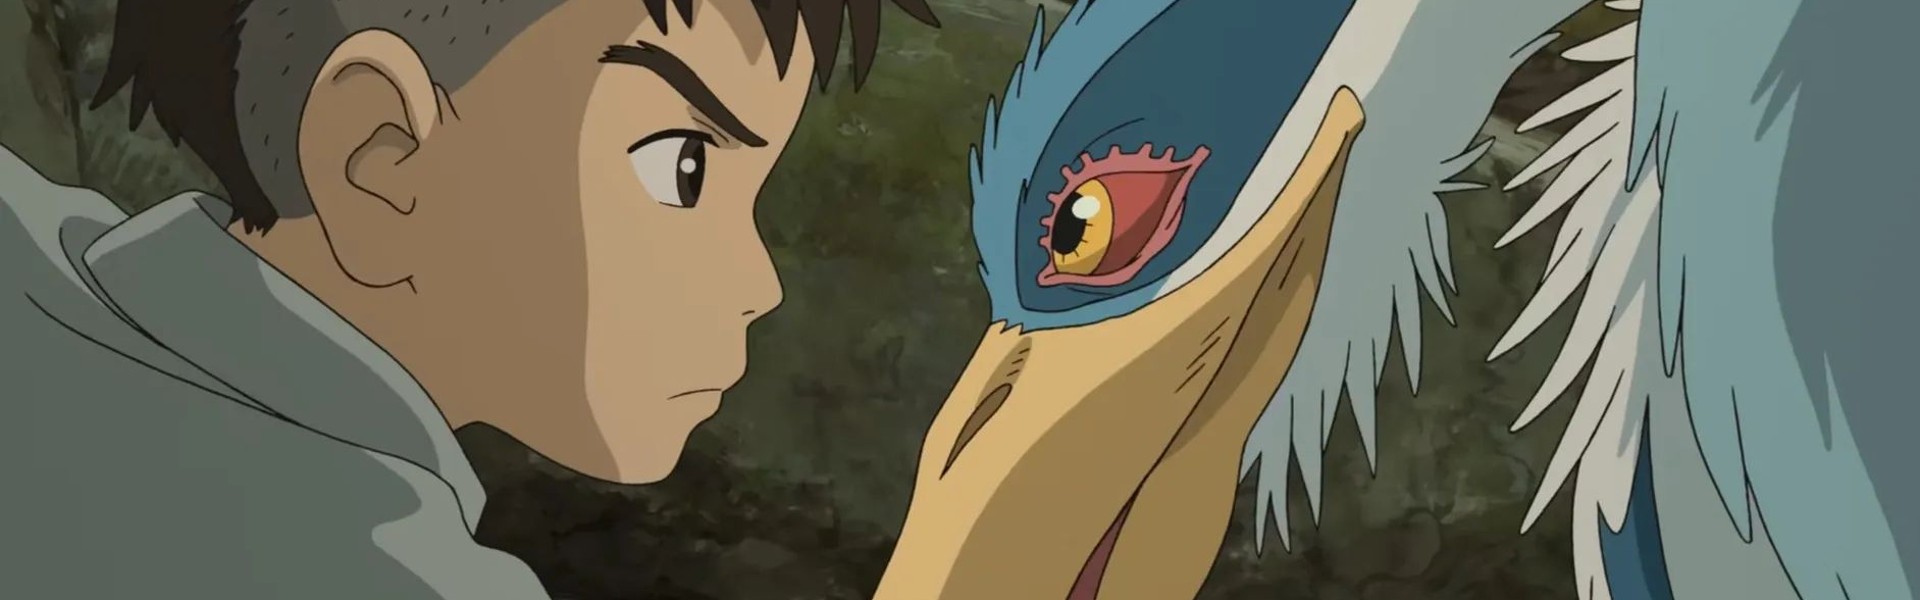 Hayao Miyazaki with Another Oscar Nomination for the Film “The Boy and the Heron”